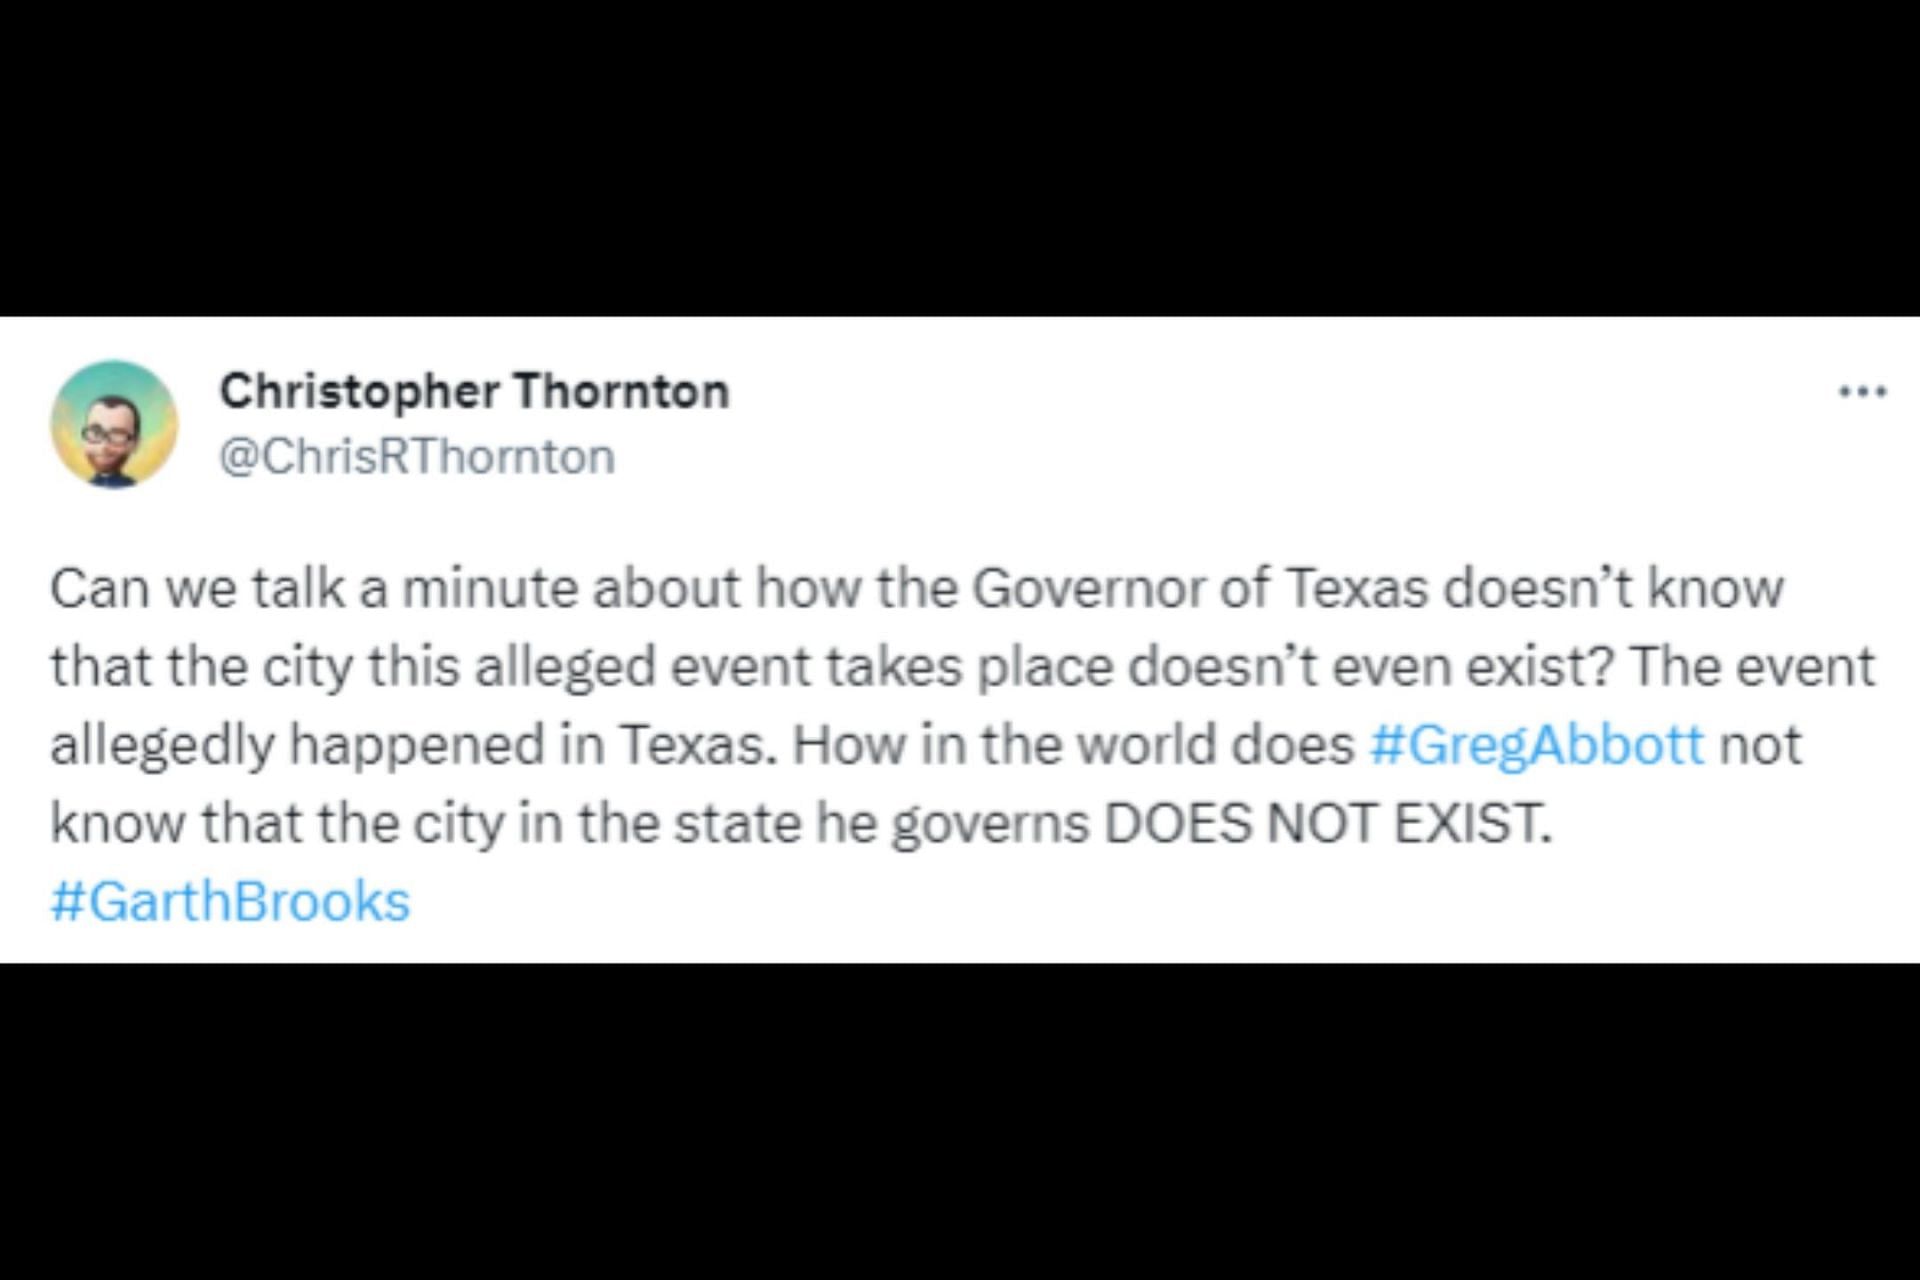 Internet reacts to satire article on Garth Brooks and the Texas Governor&#039;s tweet on it. (Image via Twitter/@ChrisRThornton)